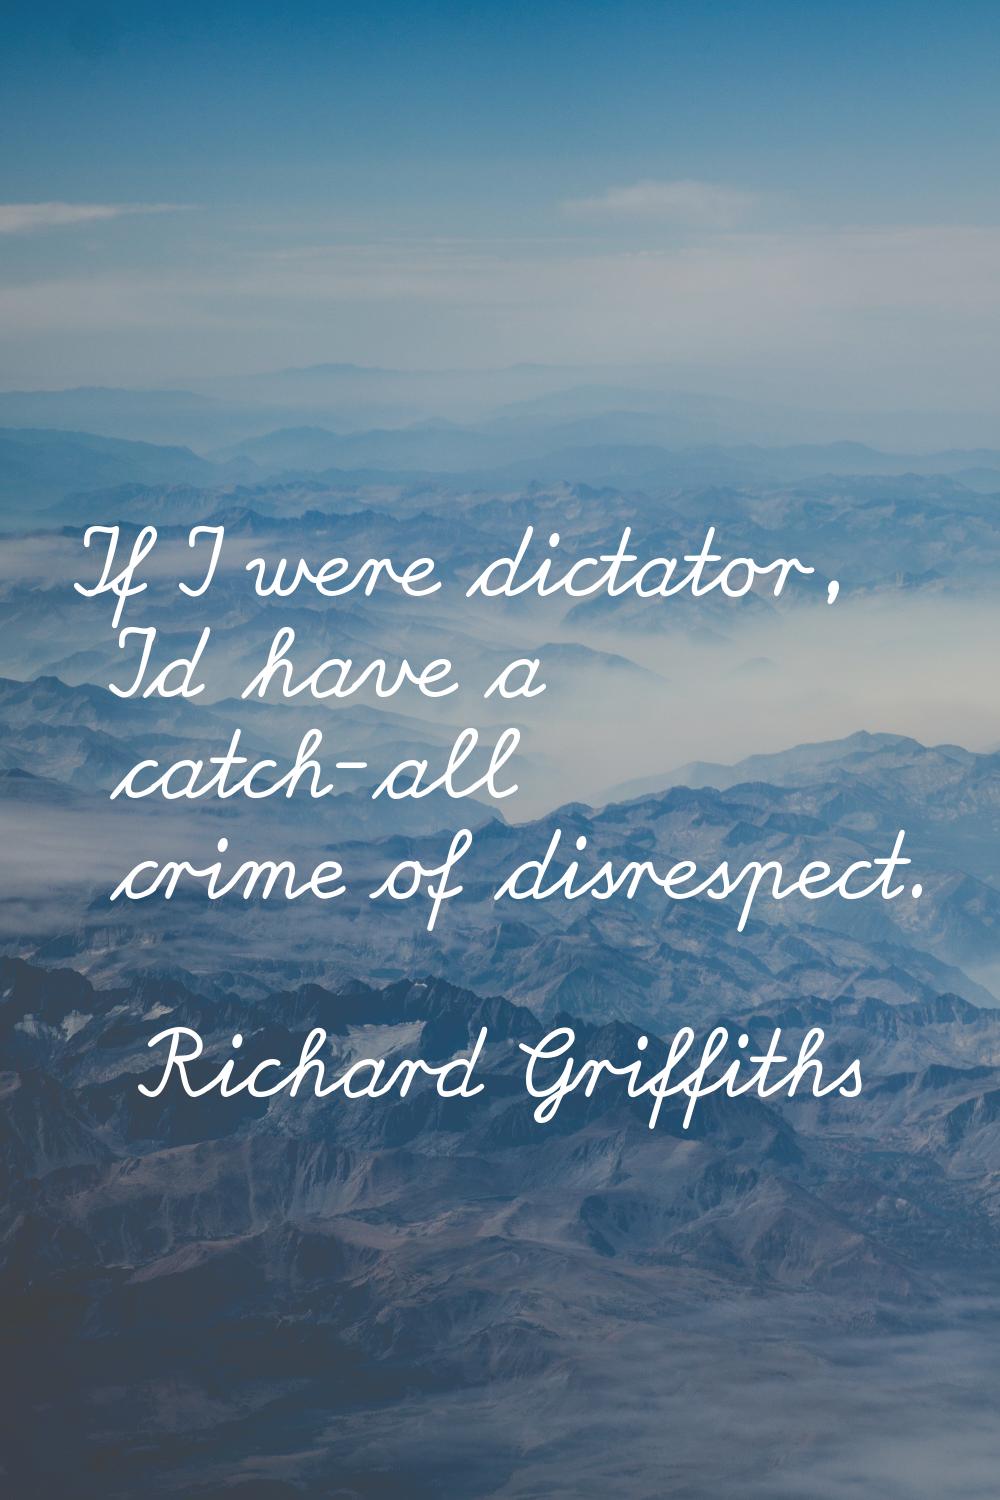 If I were dictator, I'd have a catch-all crime of disrespect.